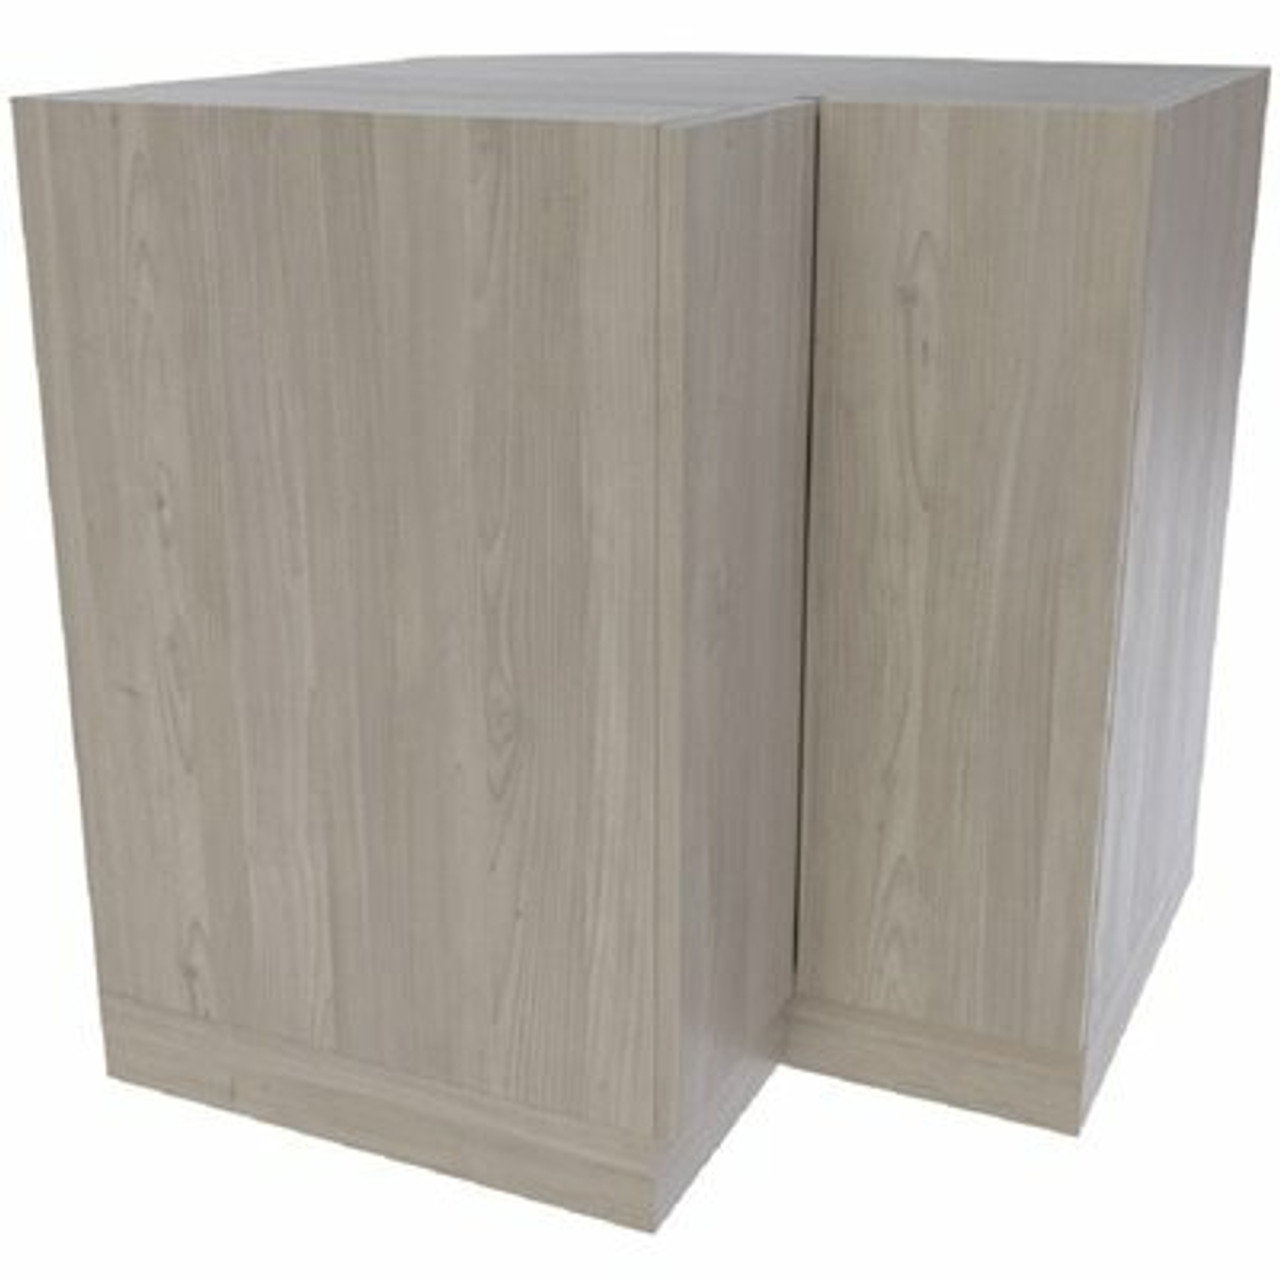 Ready To Assemble Threespine 36 In. X 34.5 In. X 36 In. Stock Lazy Susan-Excluding Carousel Base Cabinet In Grey Nordic